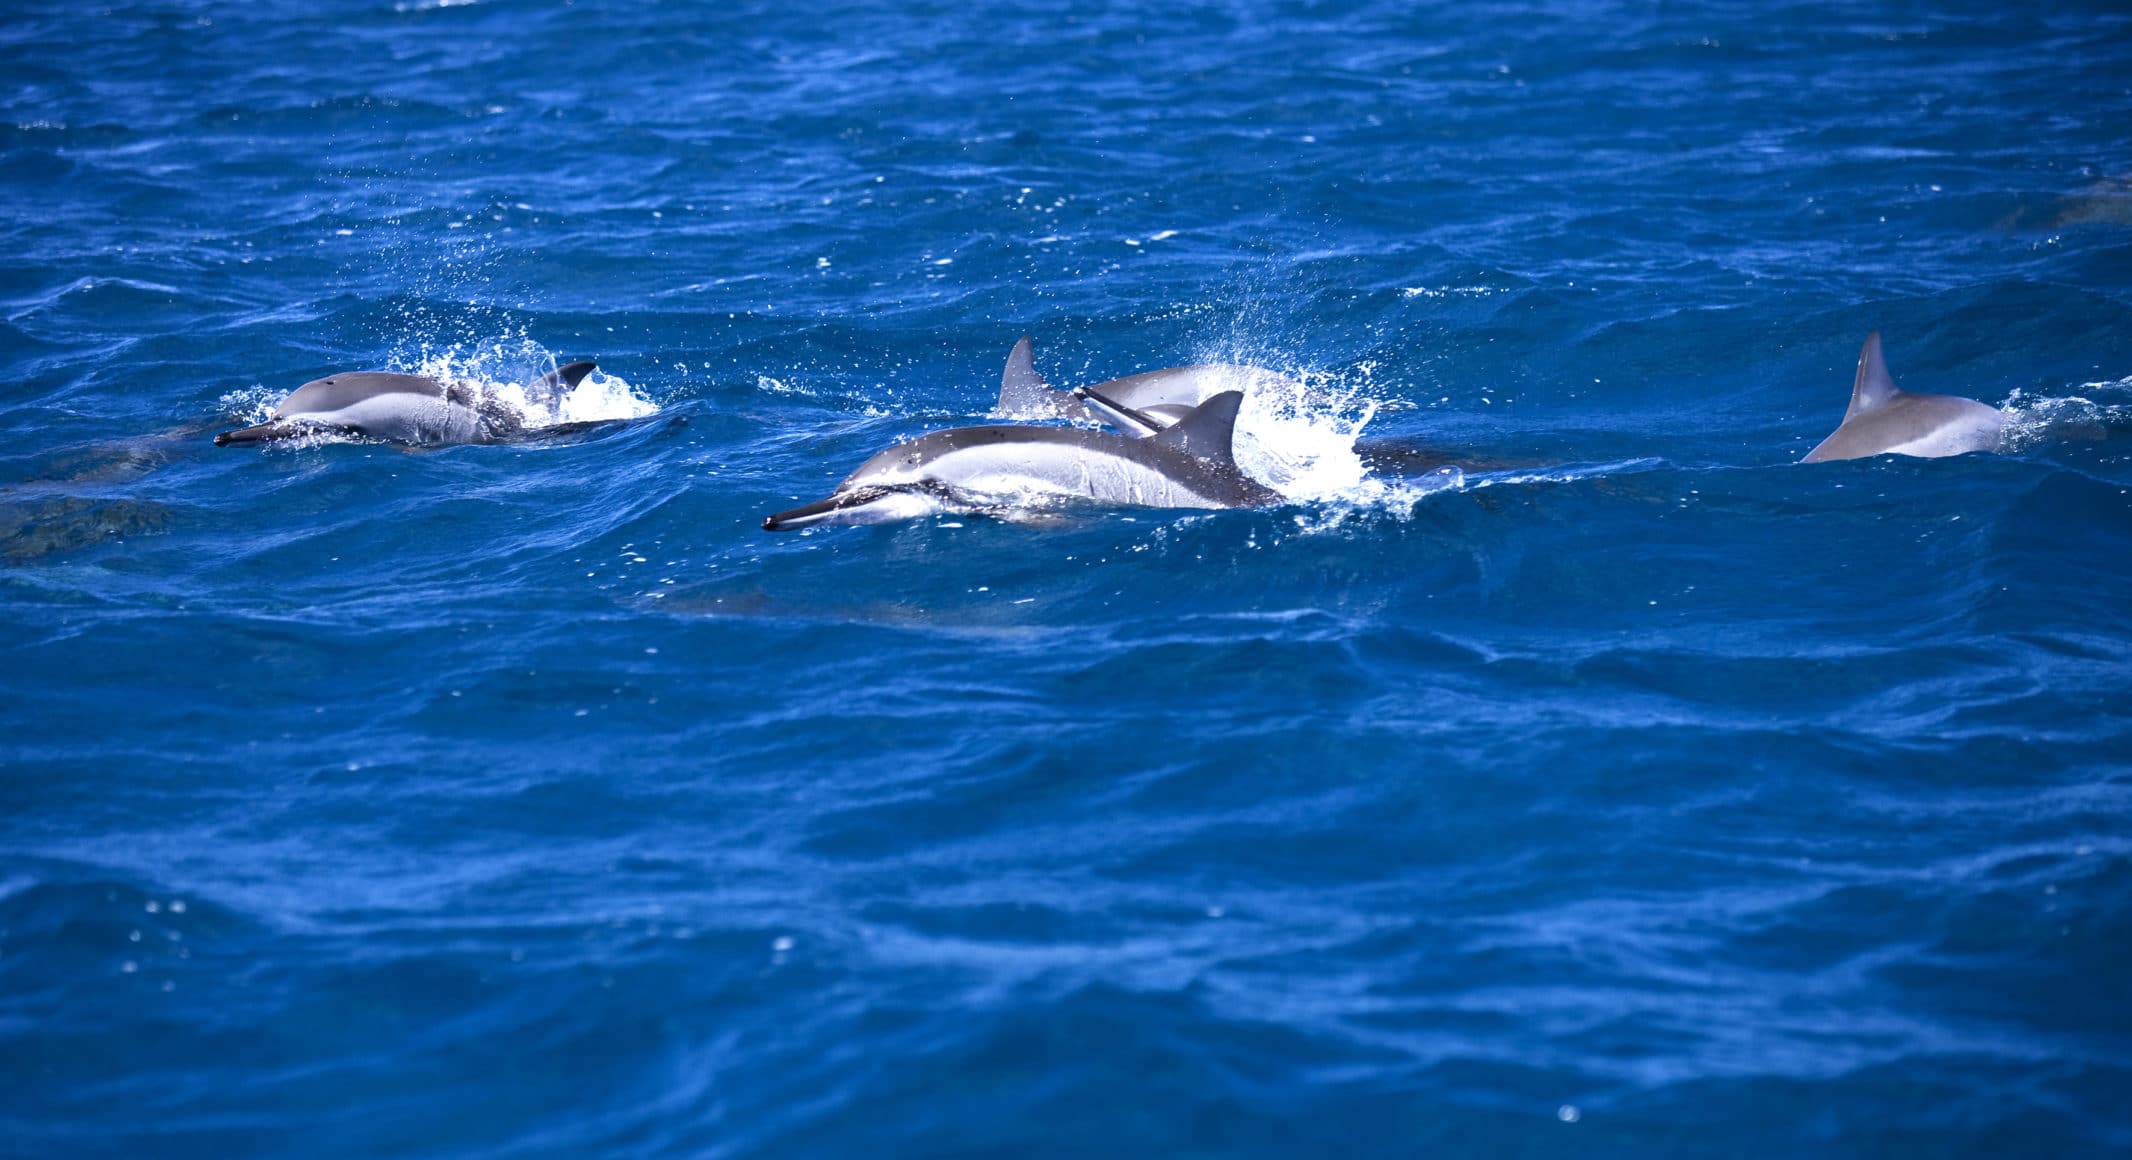 Mauritius is home to dolphins